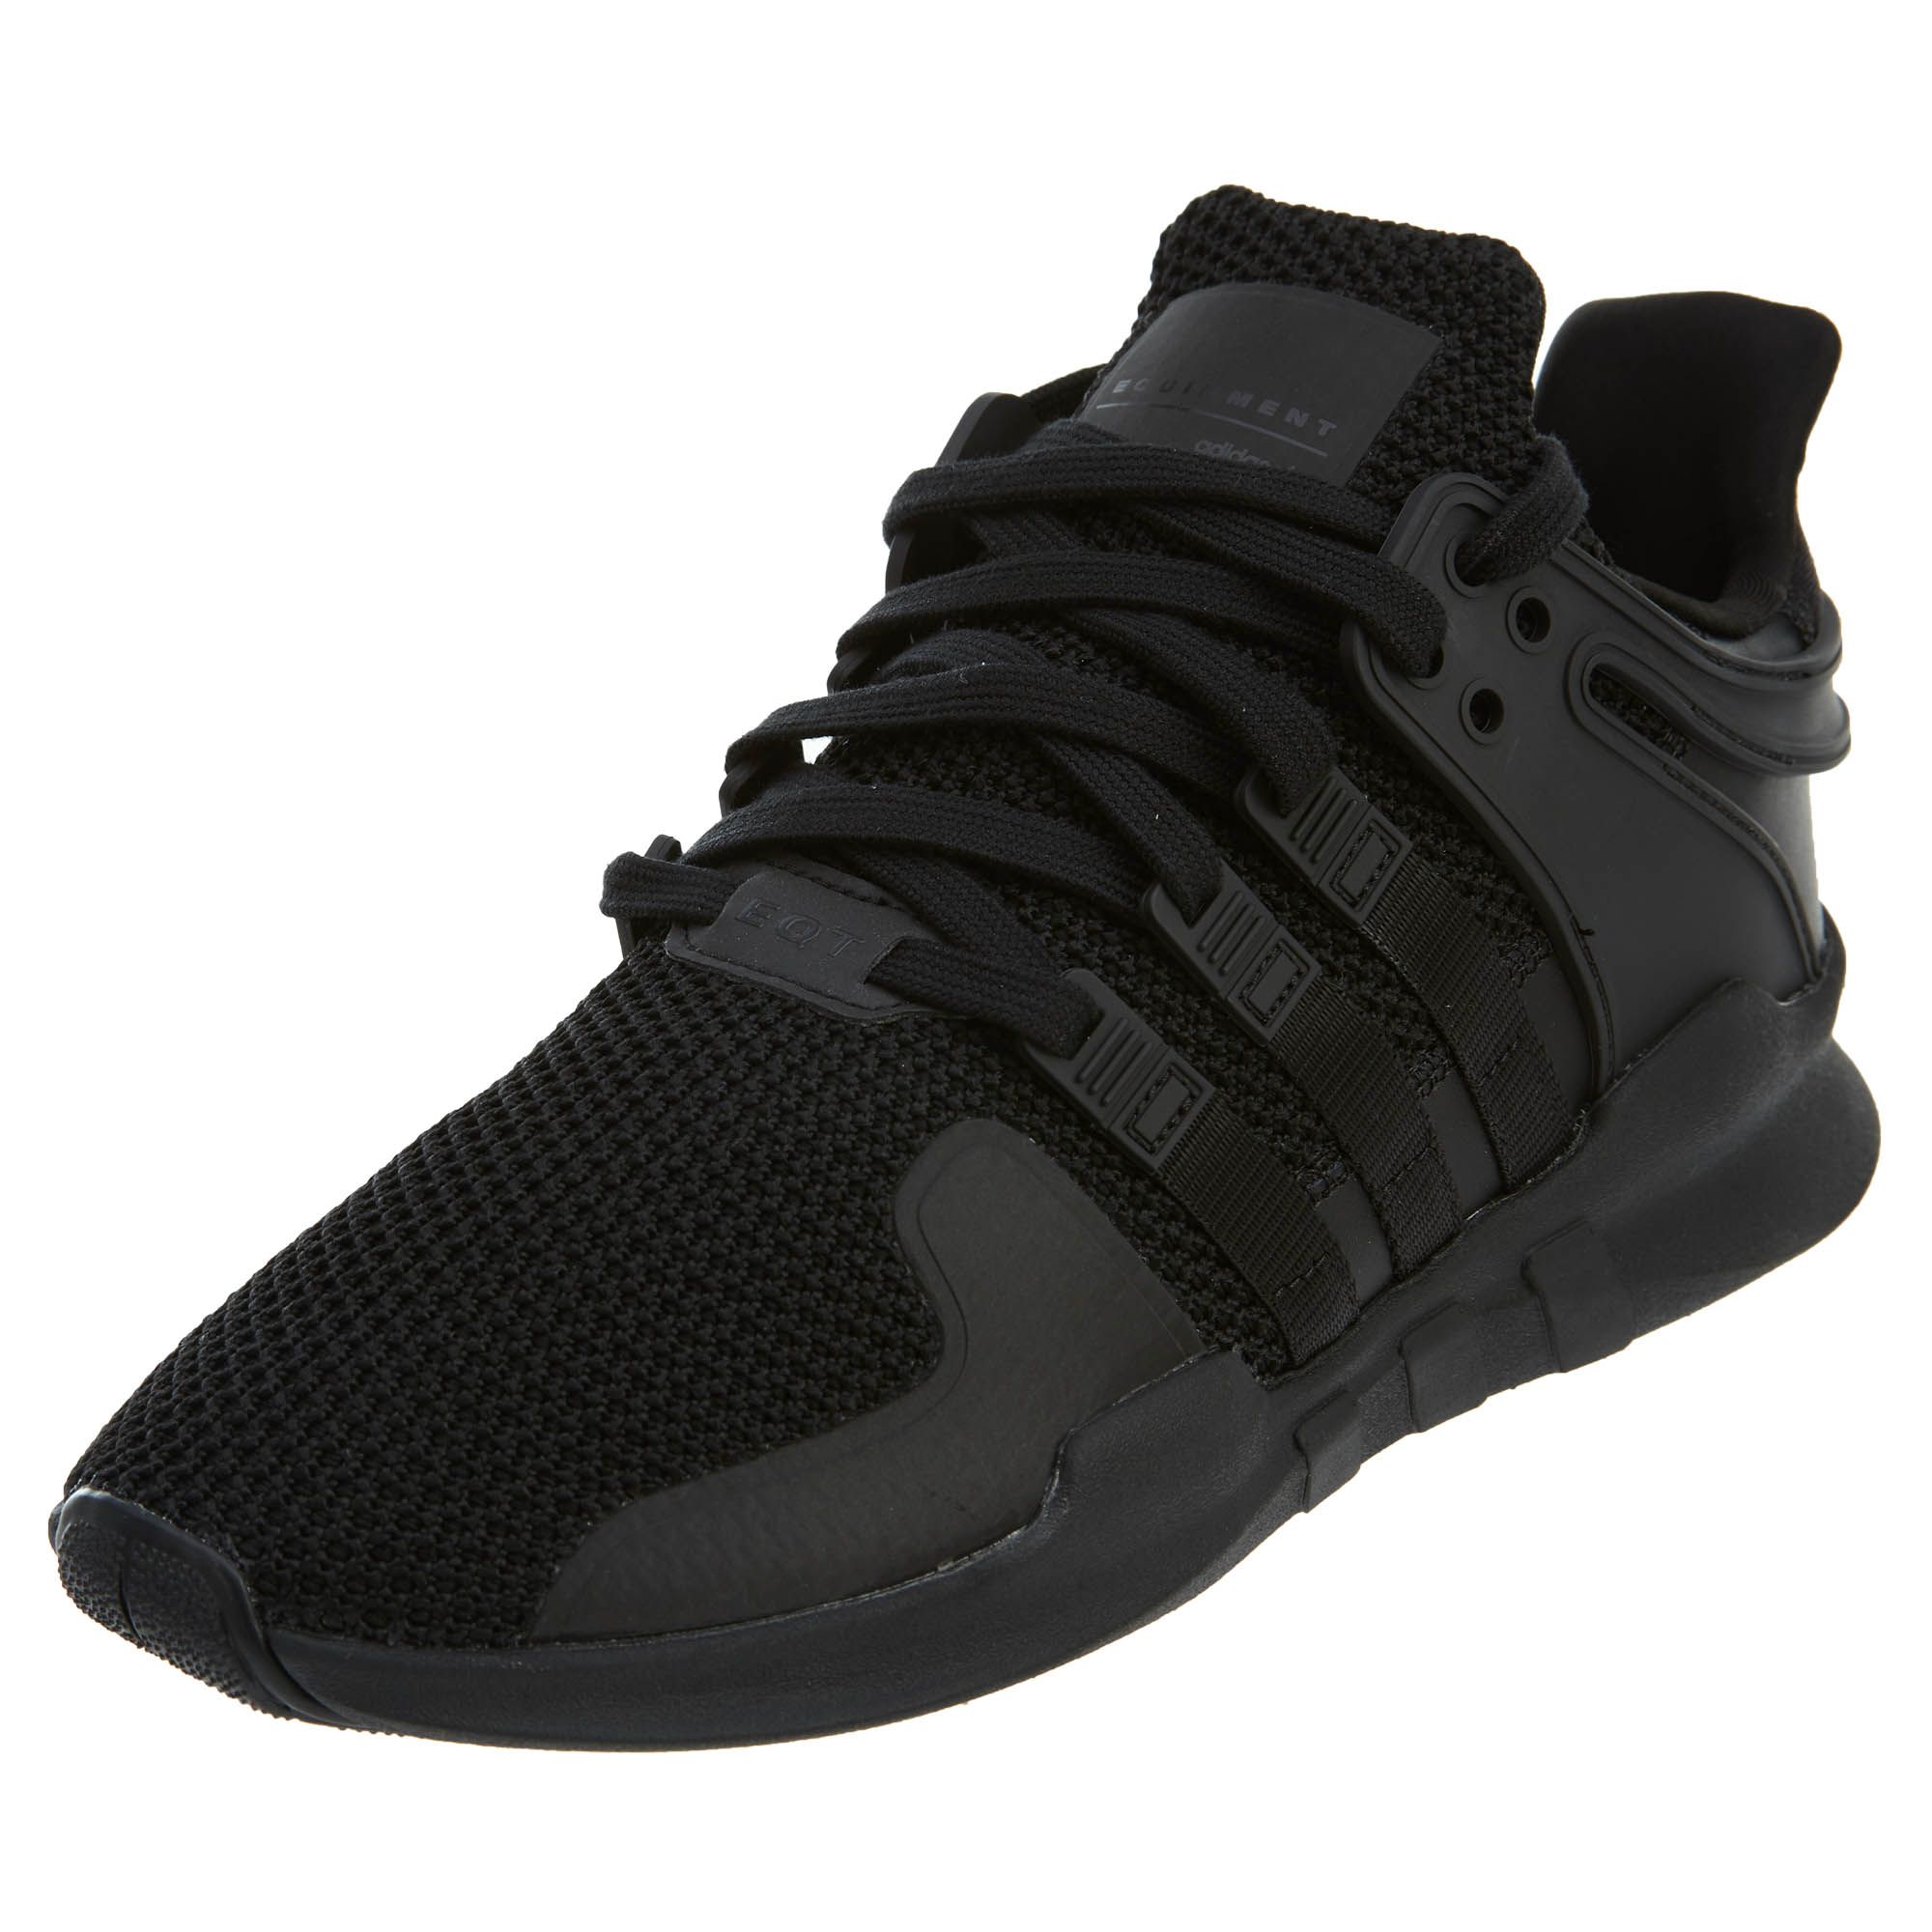 Adidas Eqt Support Adv Mens Style 